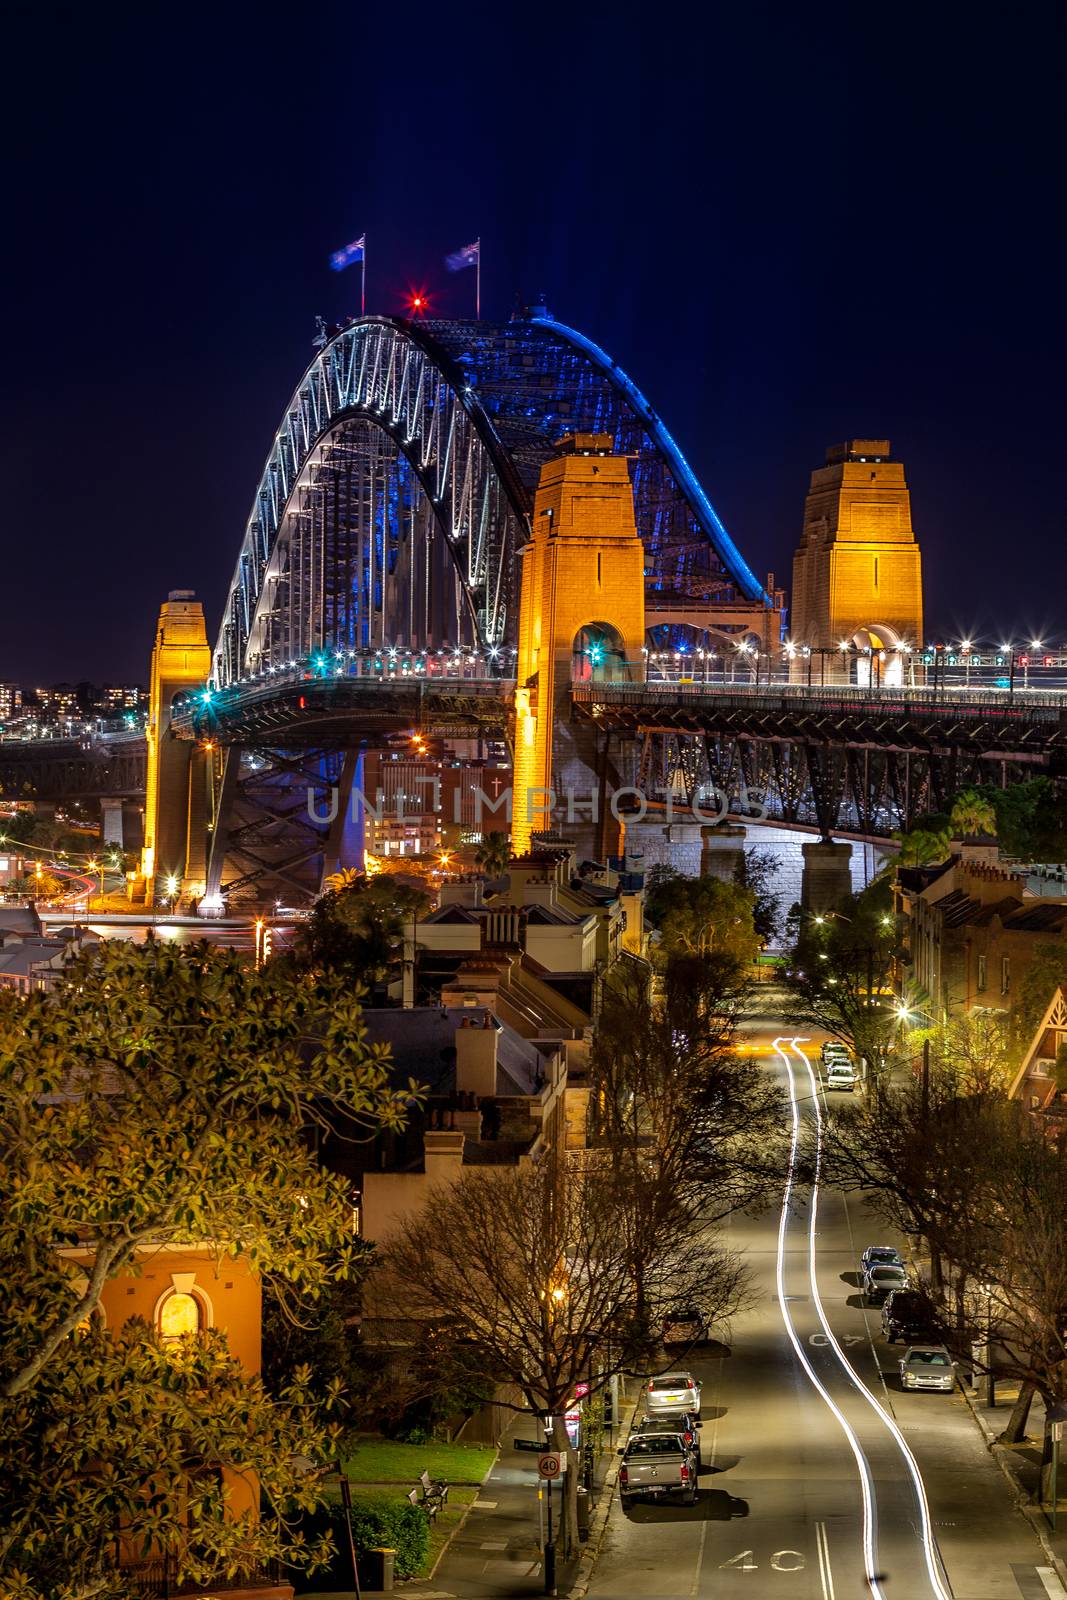 Views down the road towards Sydney Harbour Bridge, its arch lit with blue and the light reflecting in the harbour below.  A cars lights snake along the road.